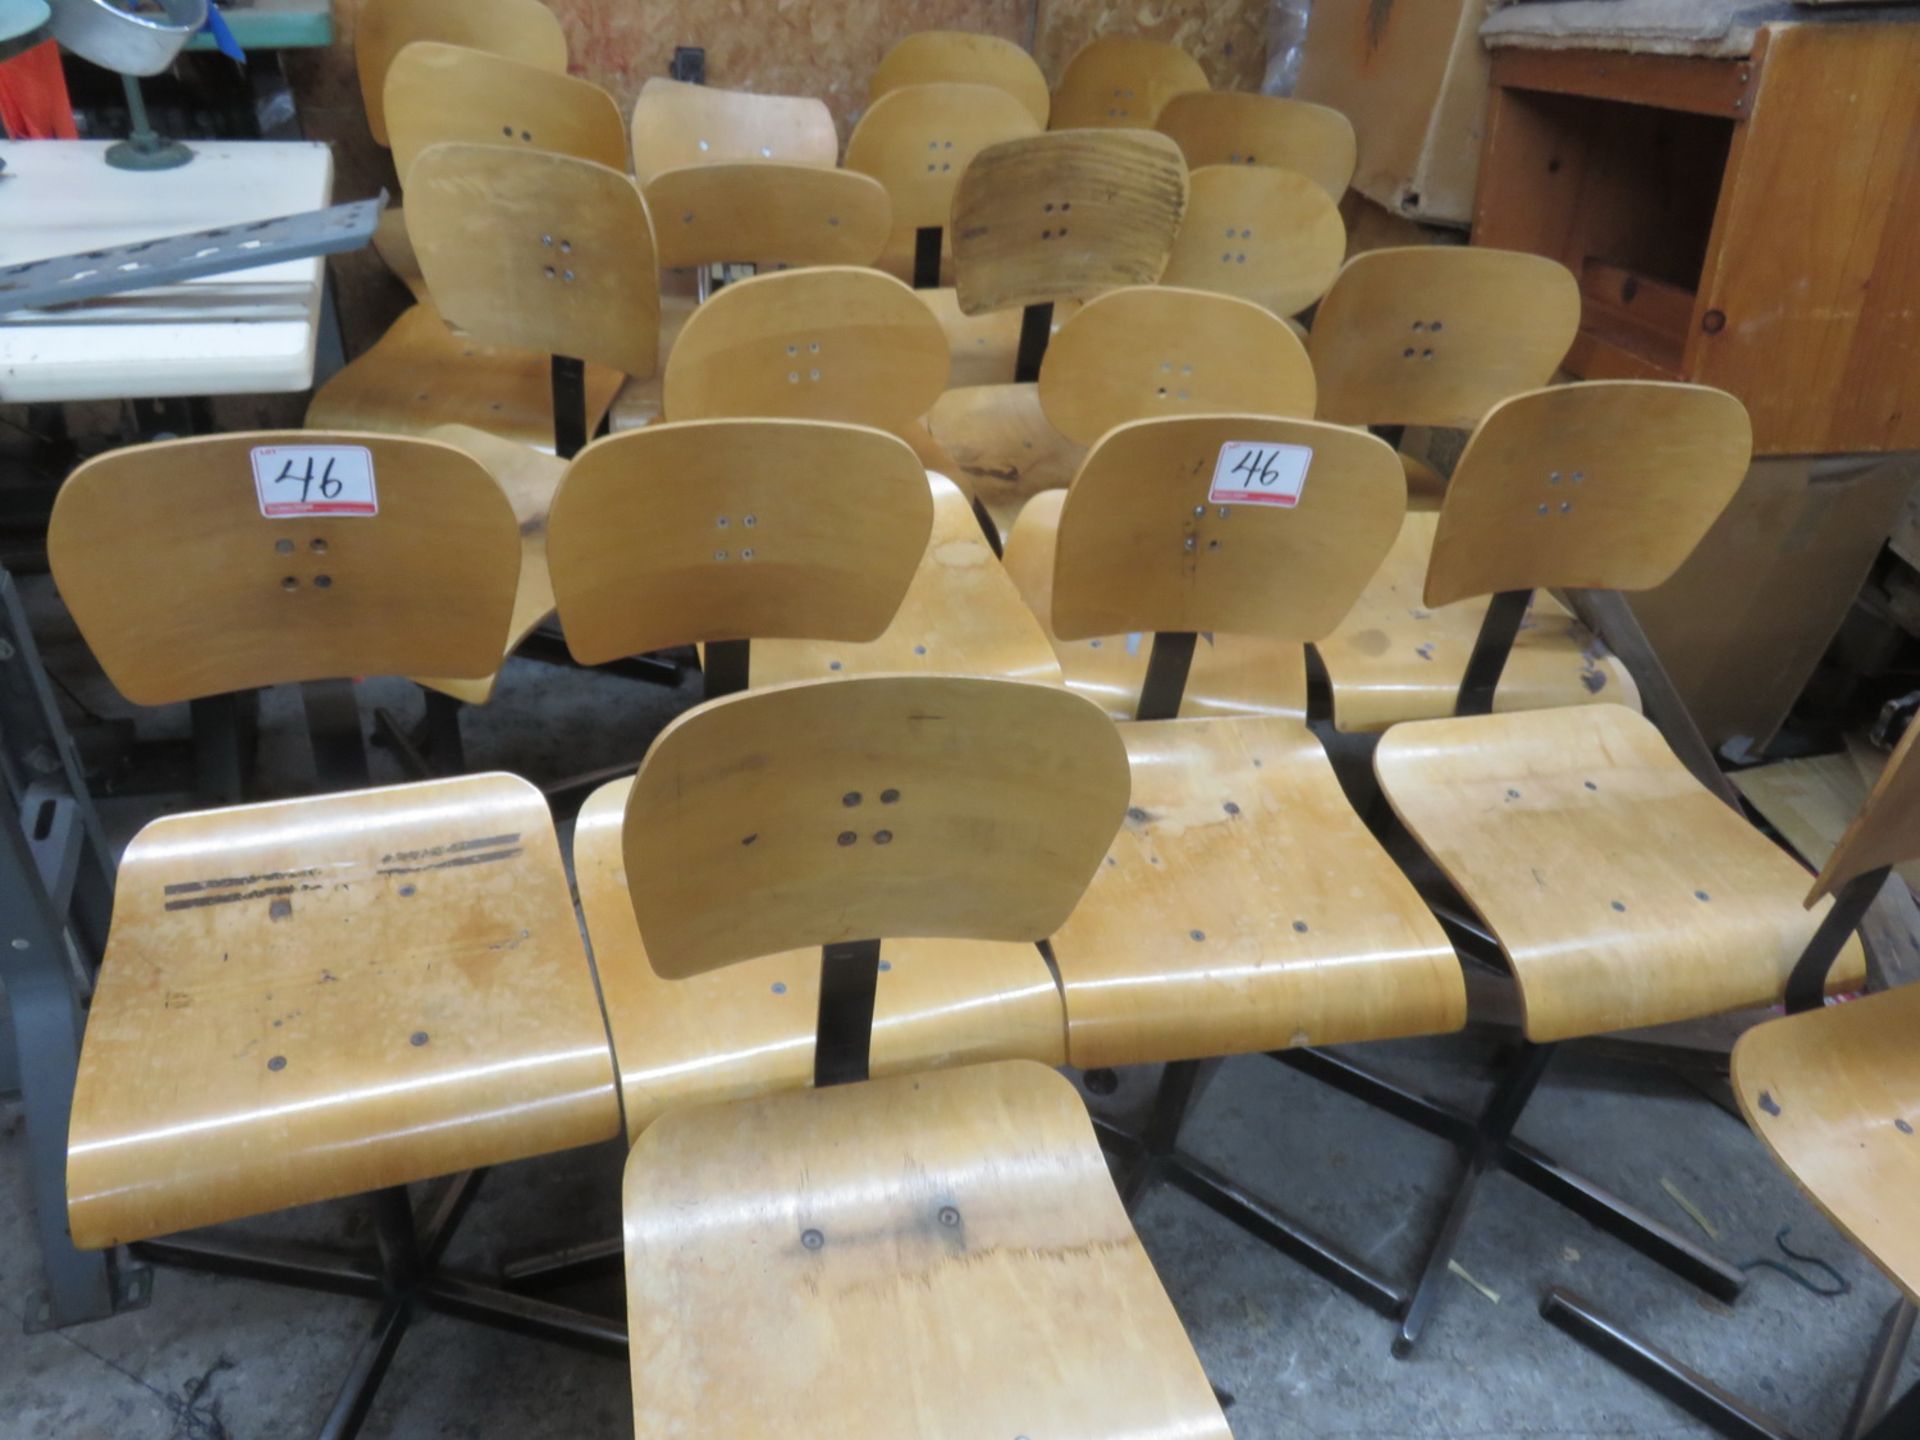 LOT - BIRCH ASSORTED CHAIRS (21 UNITS)